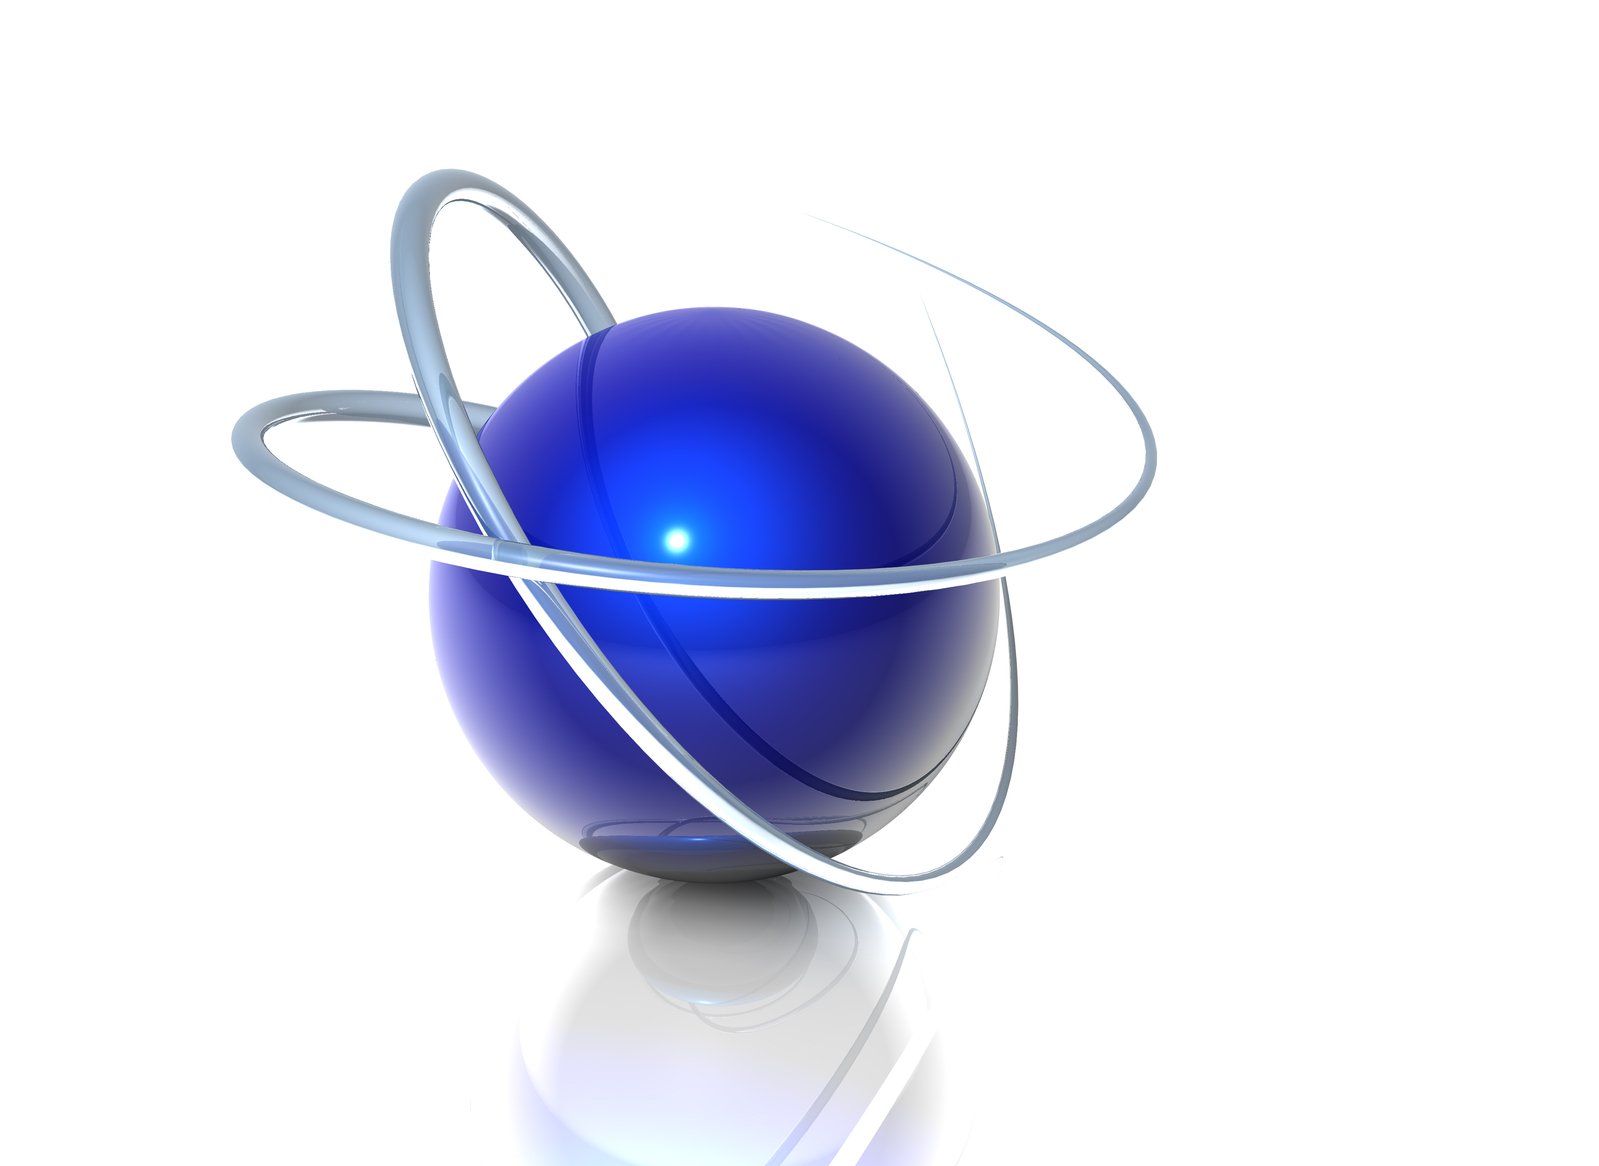 a stylized illustration of a blue sphere with rings around it